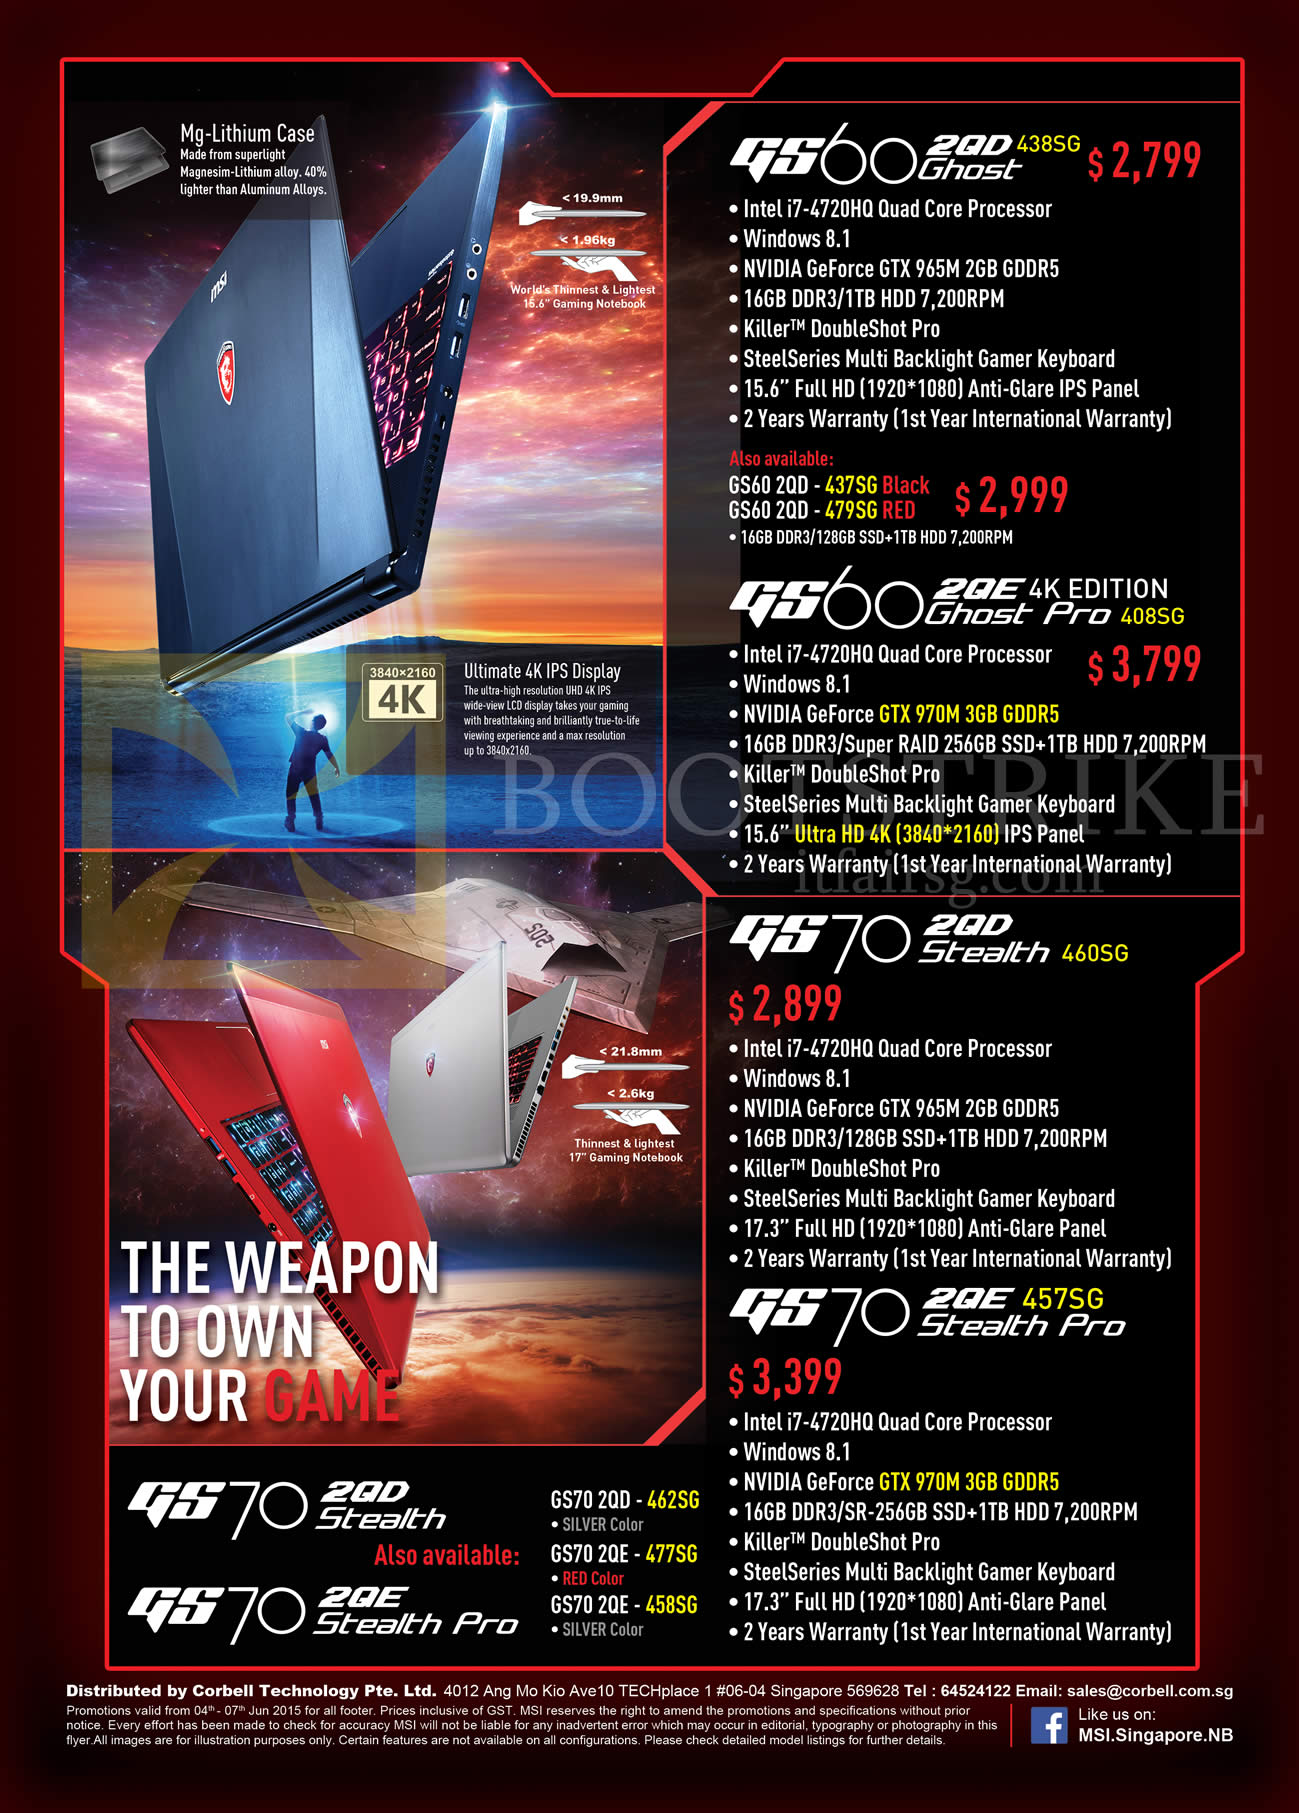 PC SHOW 2015 price list image brochure of MSI Notebooks GS60 2QD Ghost, 2QE 4K Edition Ghost Pro, 2QD Stealth 460SG, 457SG Stealth Pro